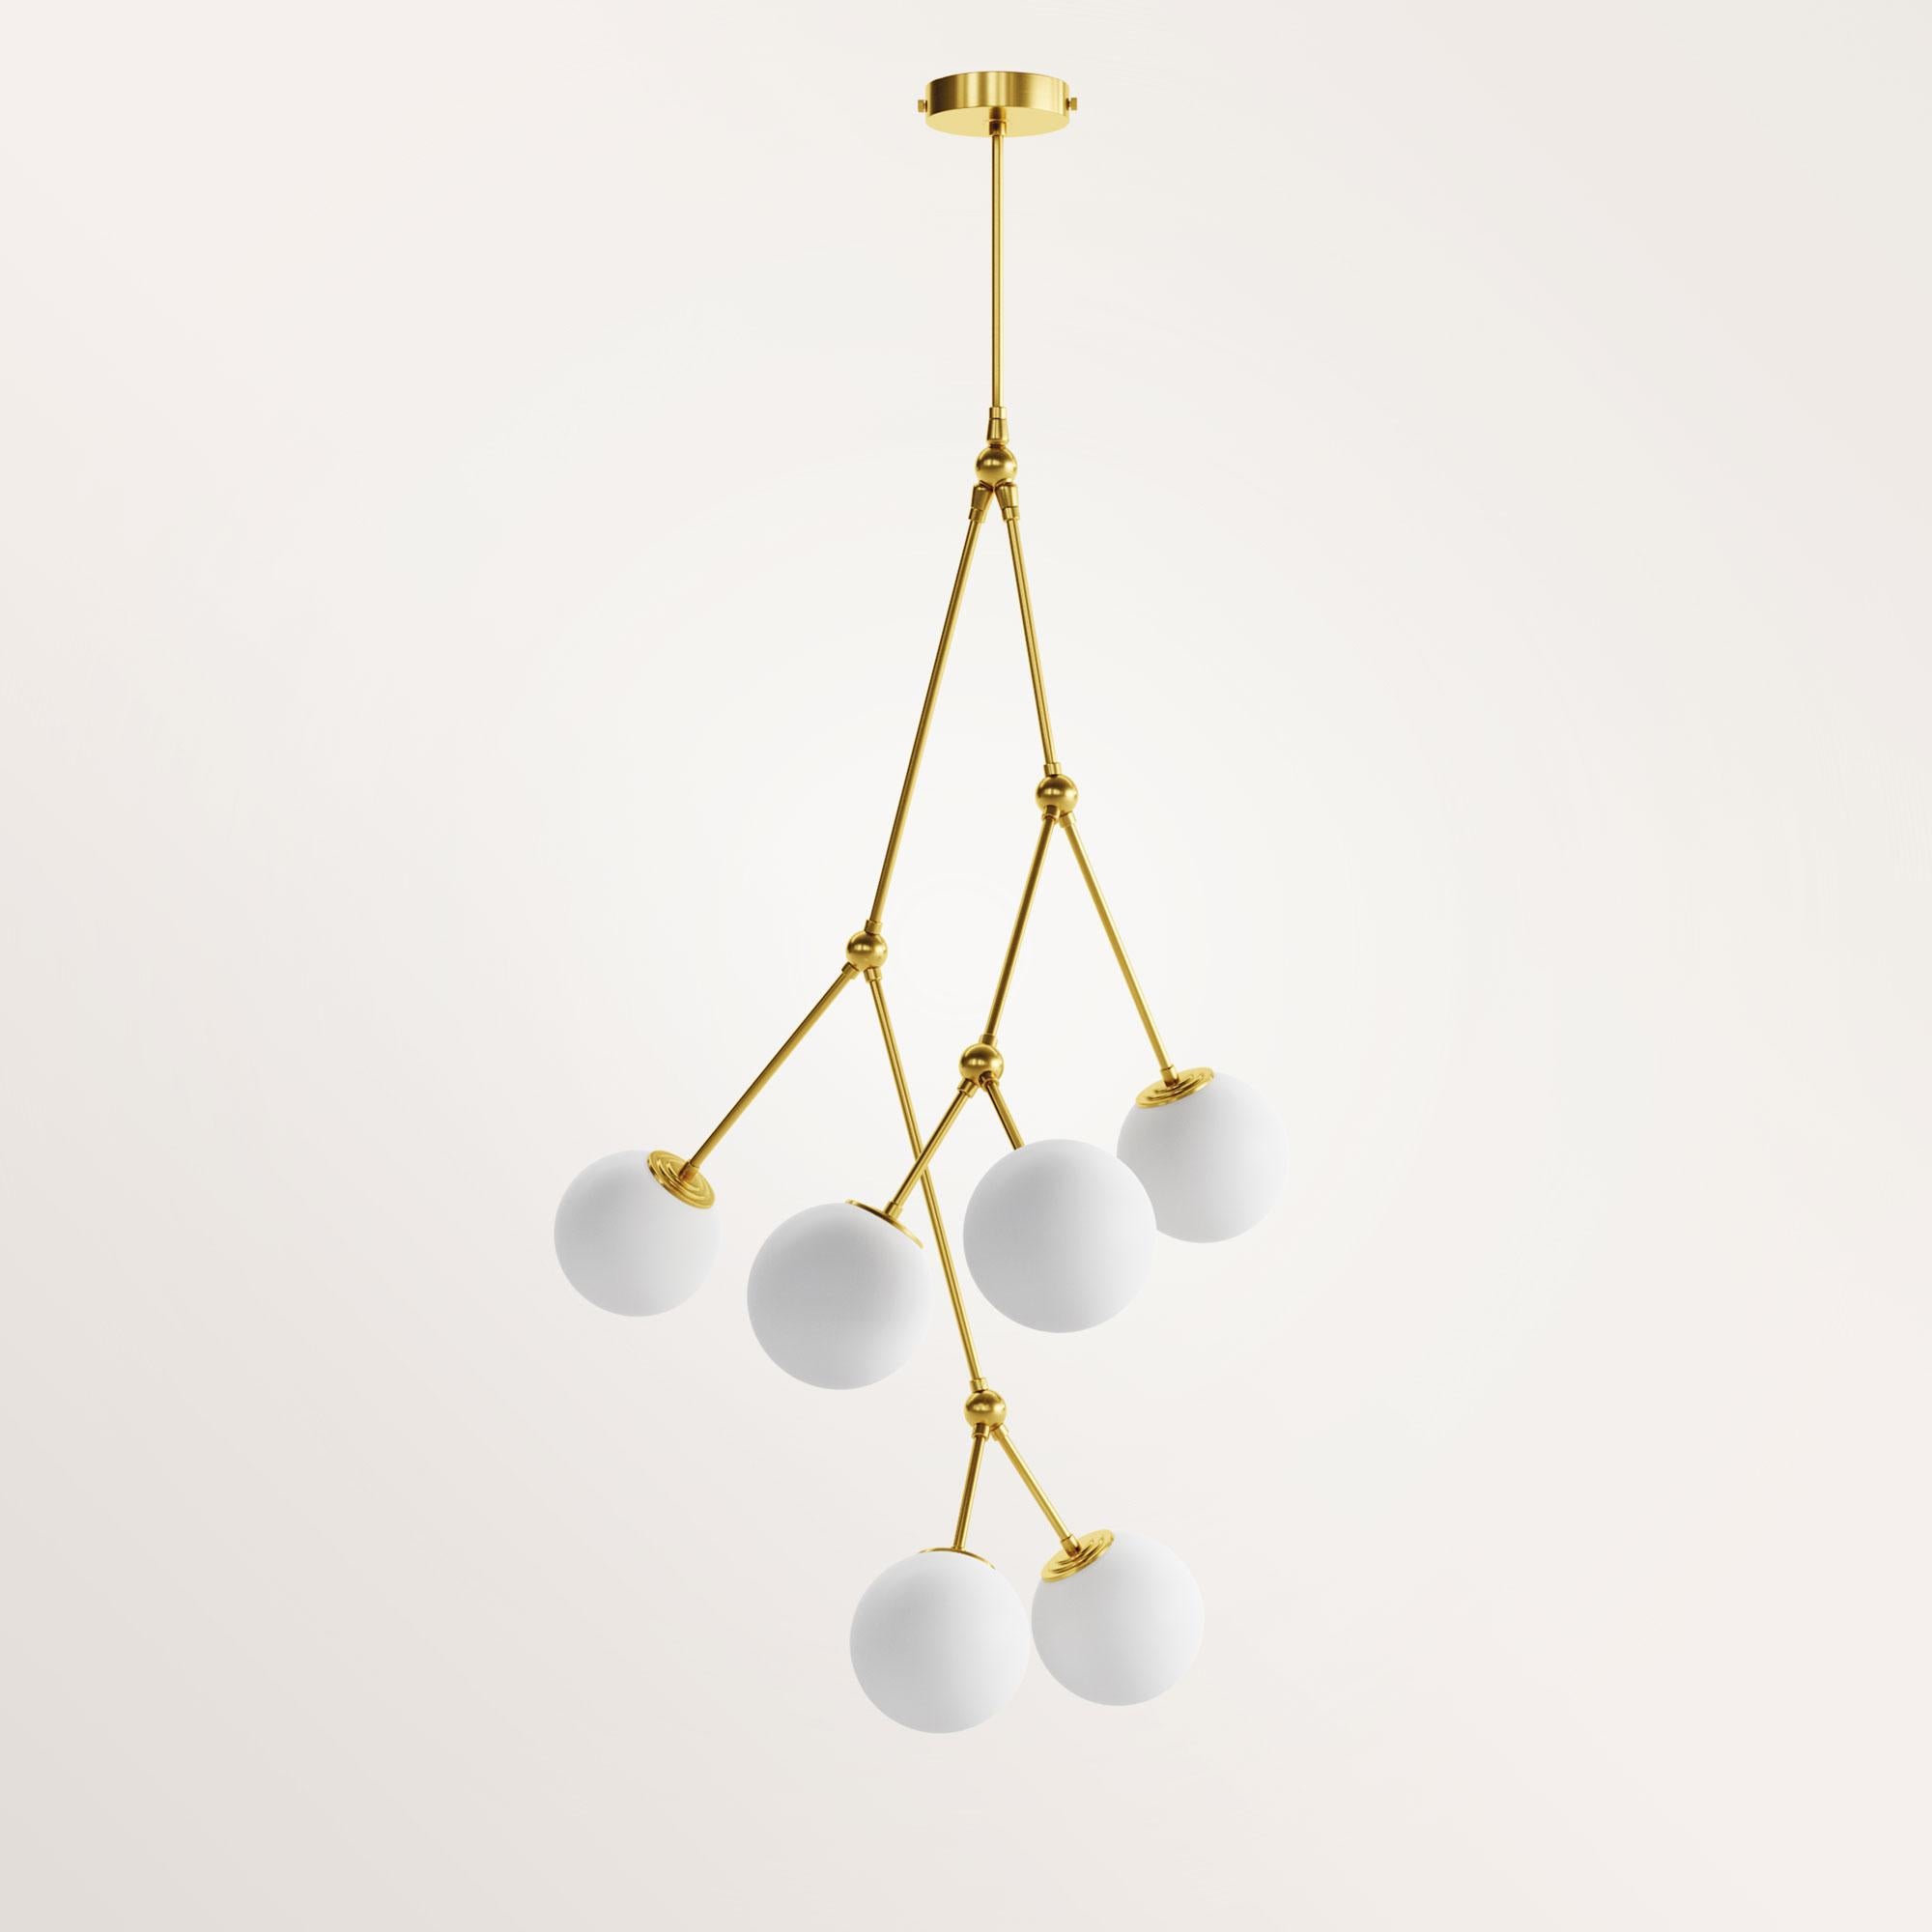 Handmade Chloris II lamp by Gobo Lights
Dimensions: 105 L x 105 l x 190 H
Materials: Brass, opaline

The empress nymph of the flower kingdom.

Self-taught and from the world of chemistry, this Belgian craftsman / designer designs his pieces with as